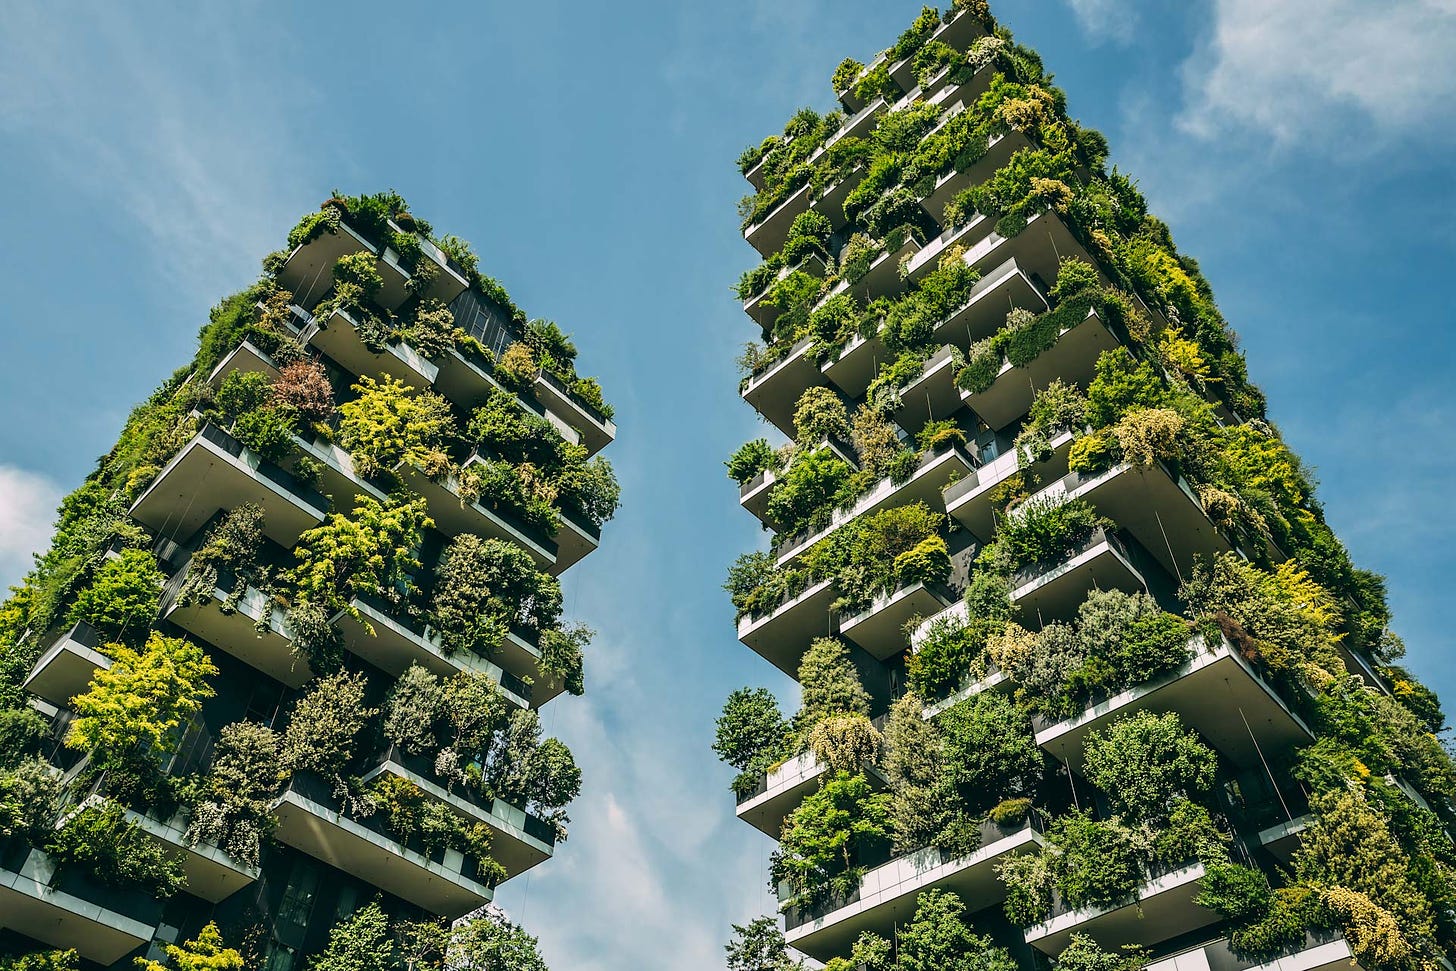 The Vertical Forest in Milan - We Build Value